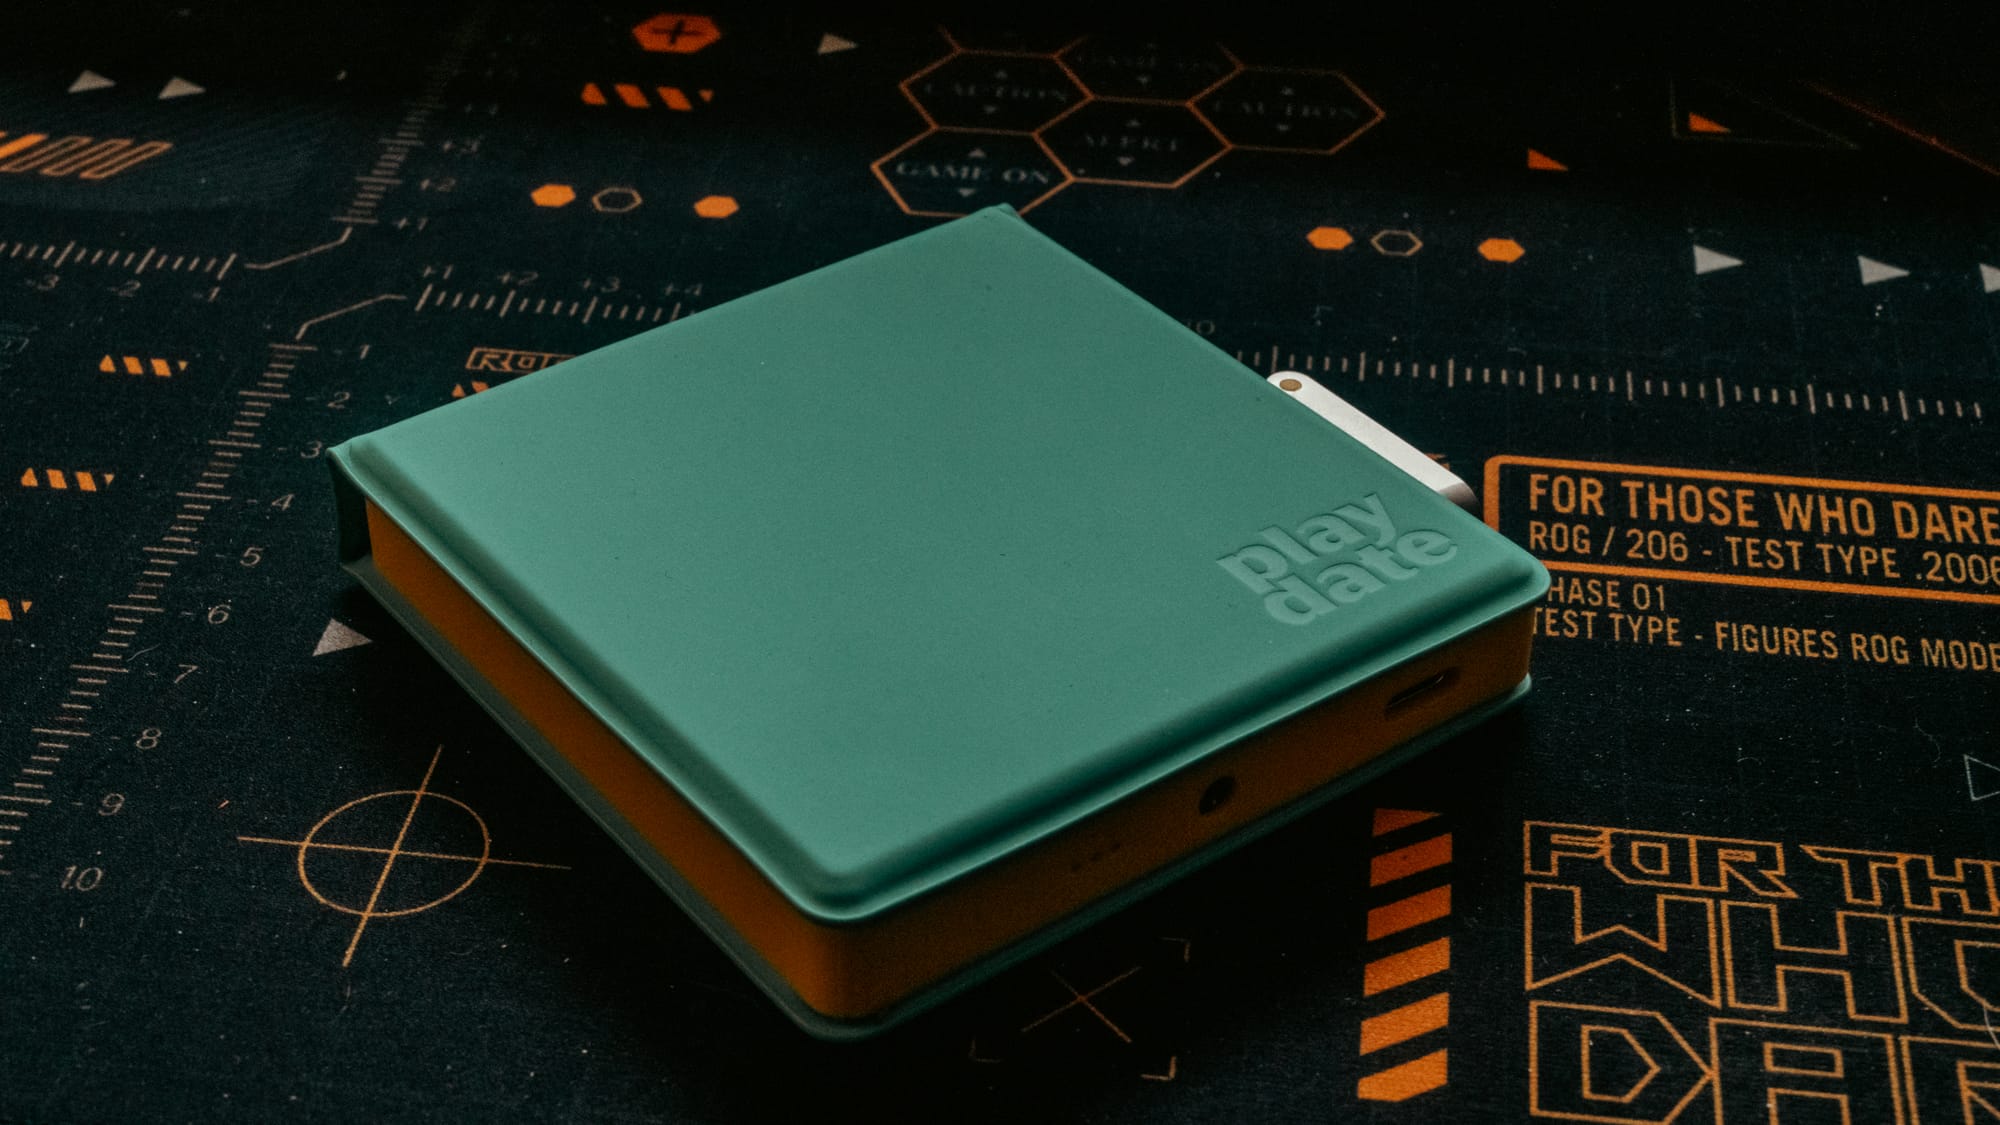 The teal playdate case set against a black mat.